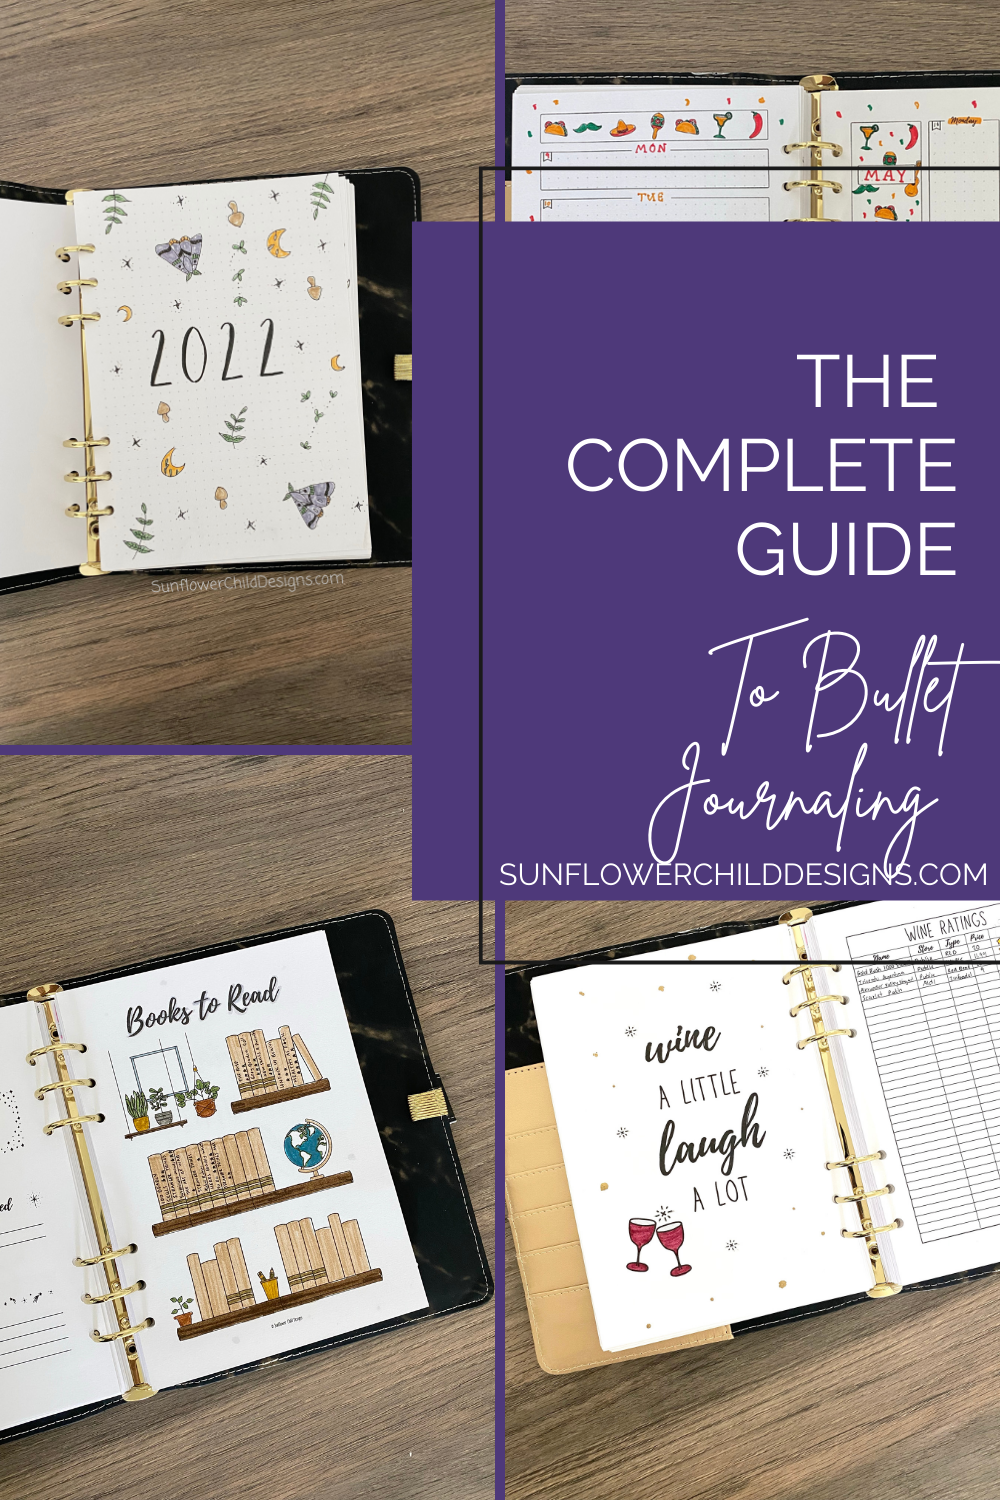 How to Journal in 2022: Helpful Journaling Tips for Beginners